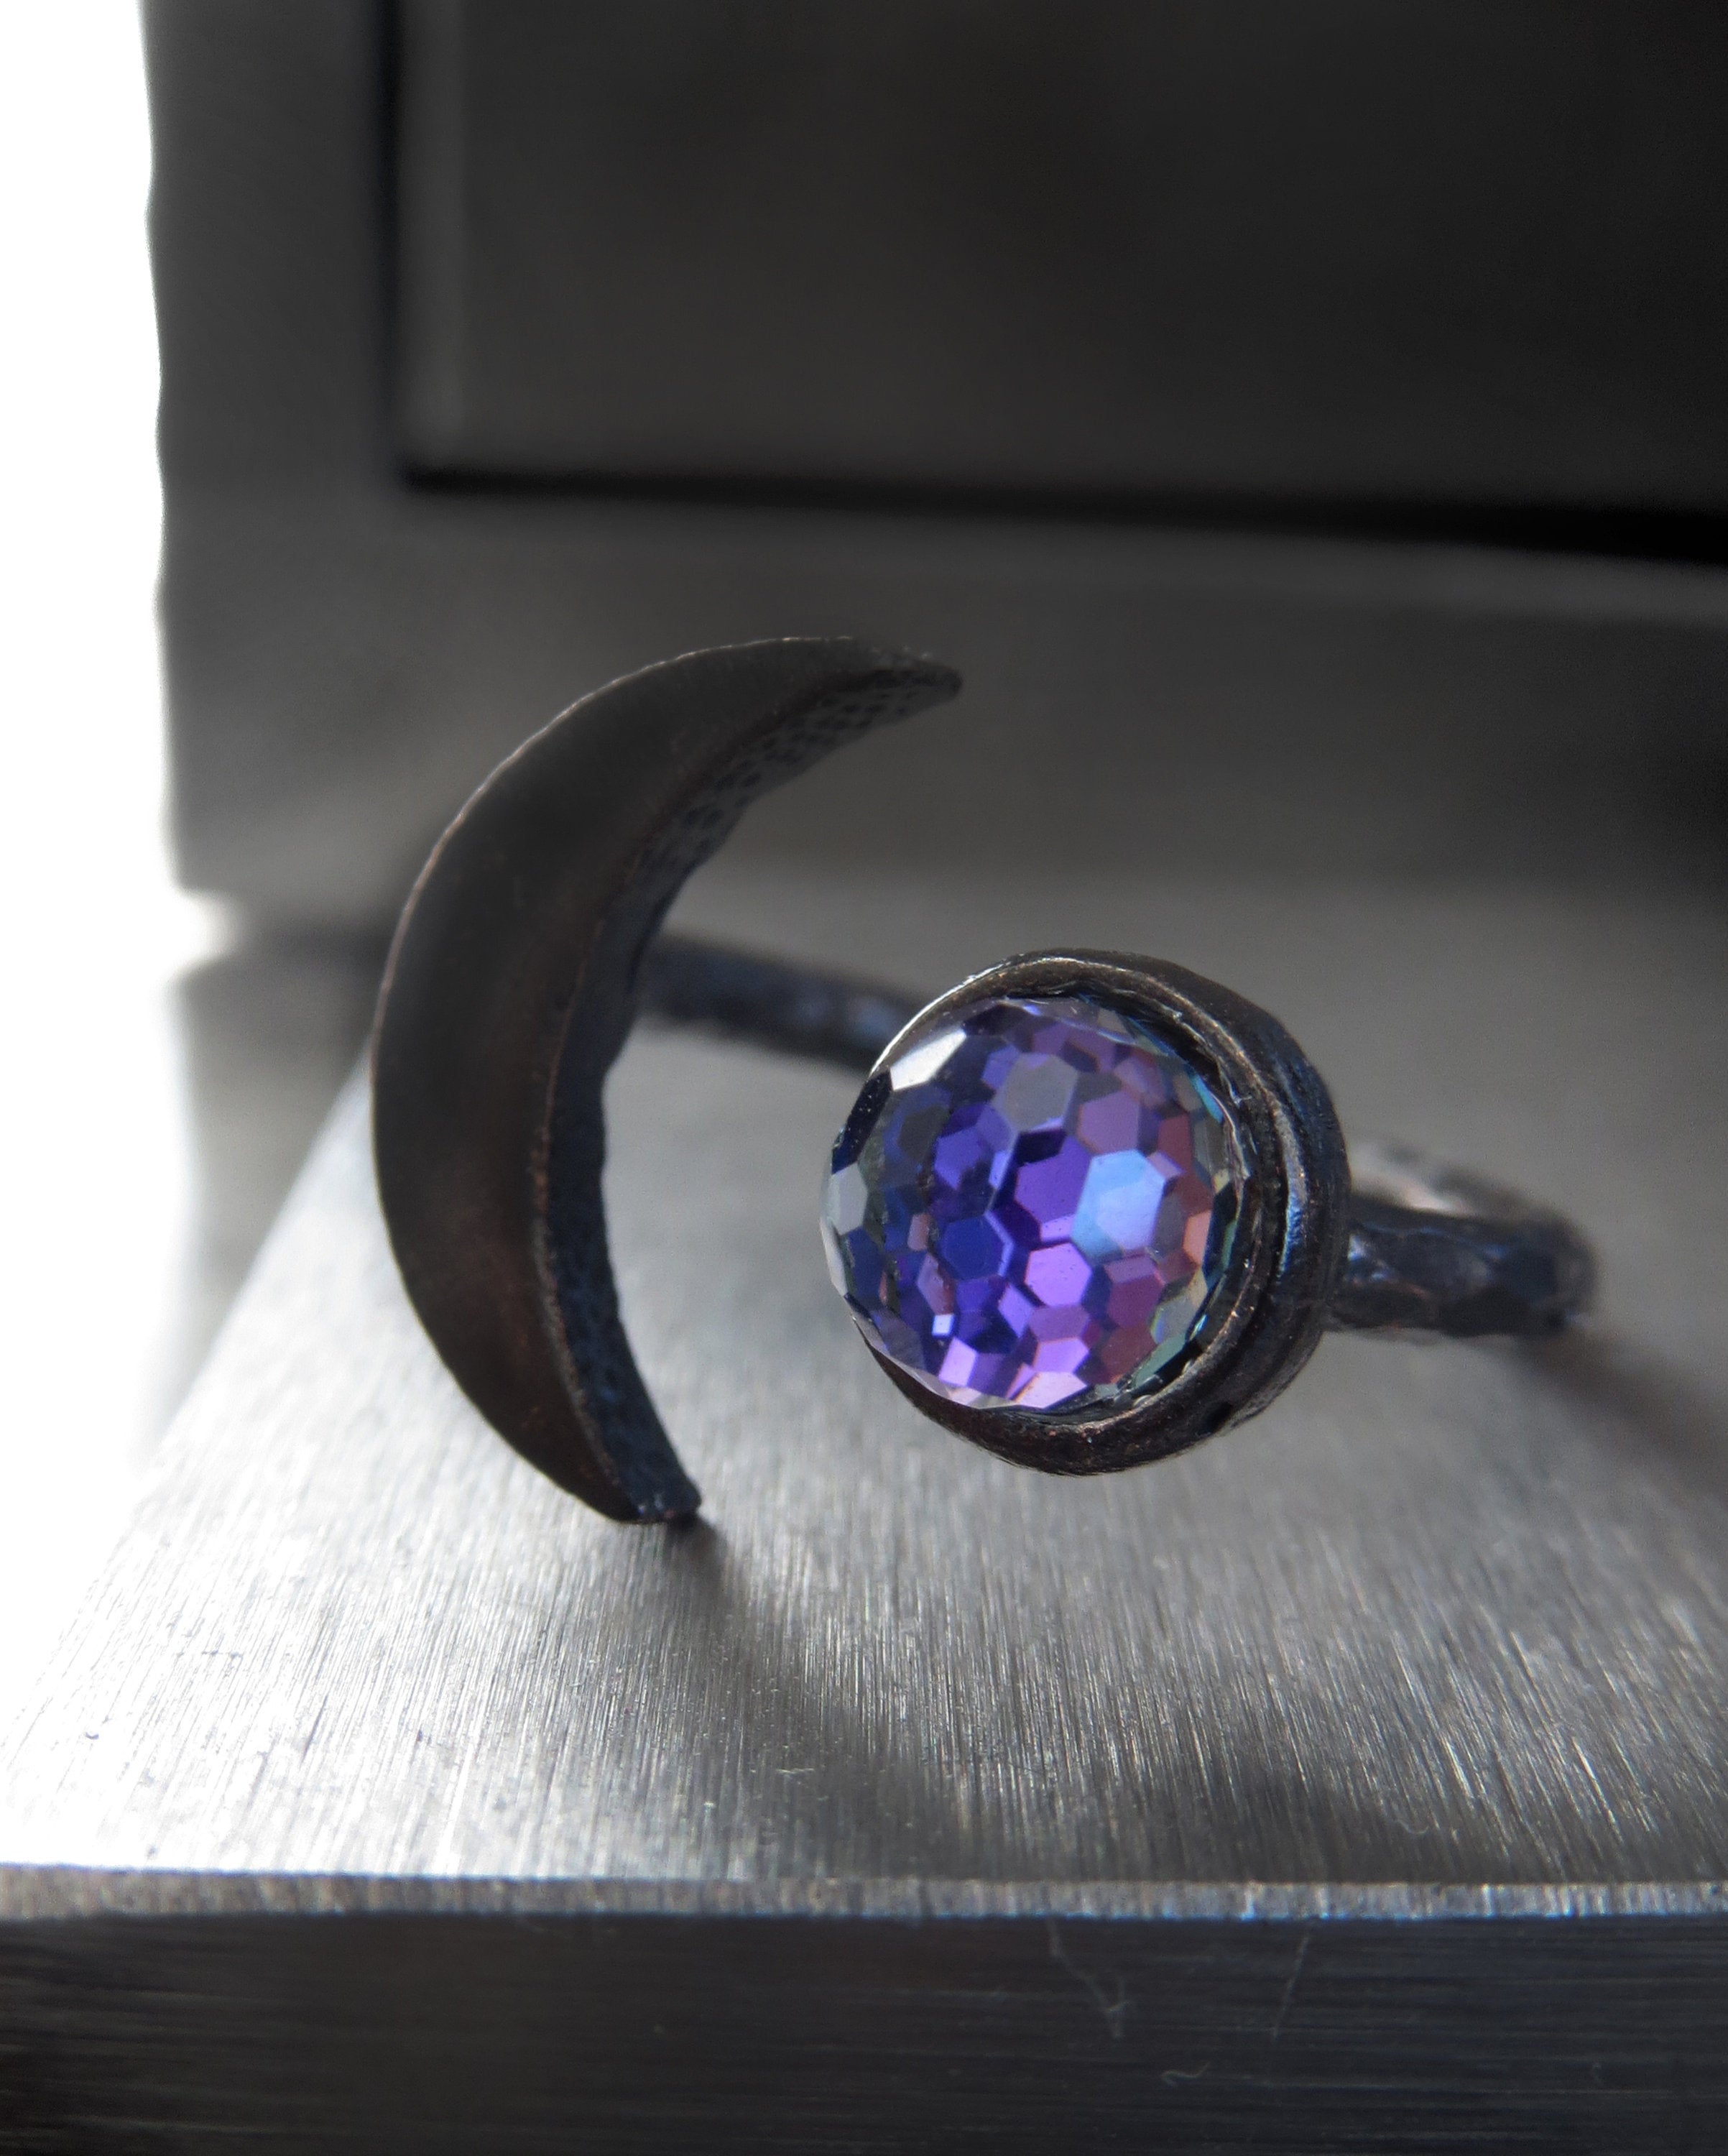 CELESTIAL - Black Cresent Moon Ring with Purple Vintage Swarovski Crystal - Mystical Gift for Teen Girl, Teenager, Women - Moon Jewelry